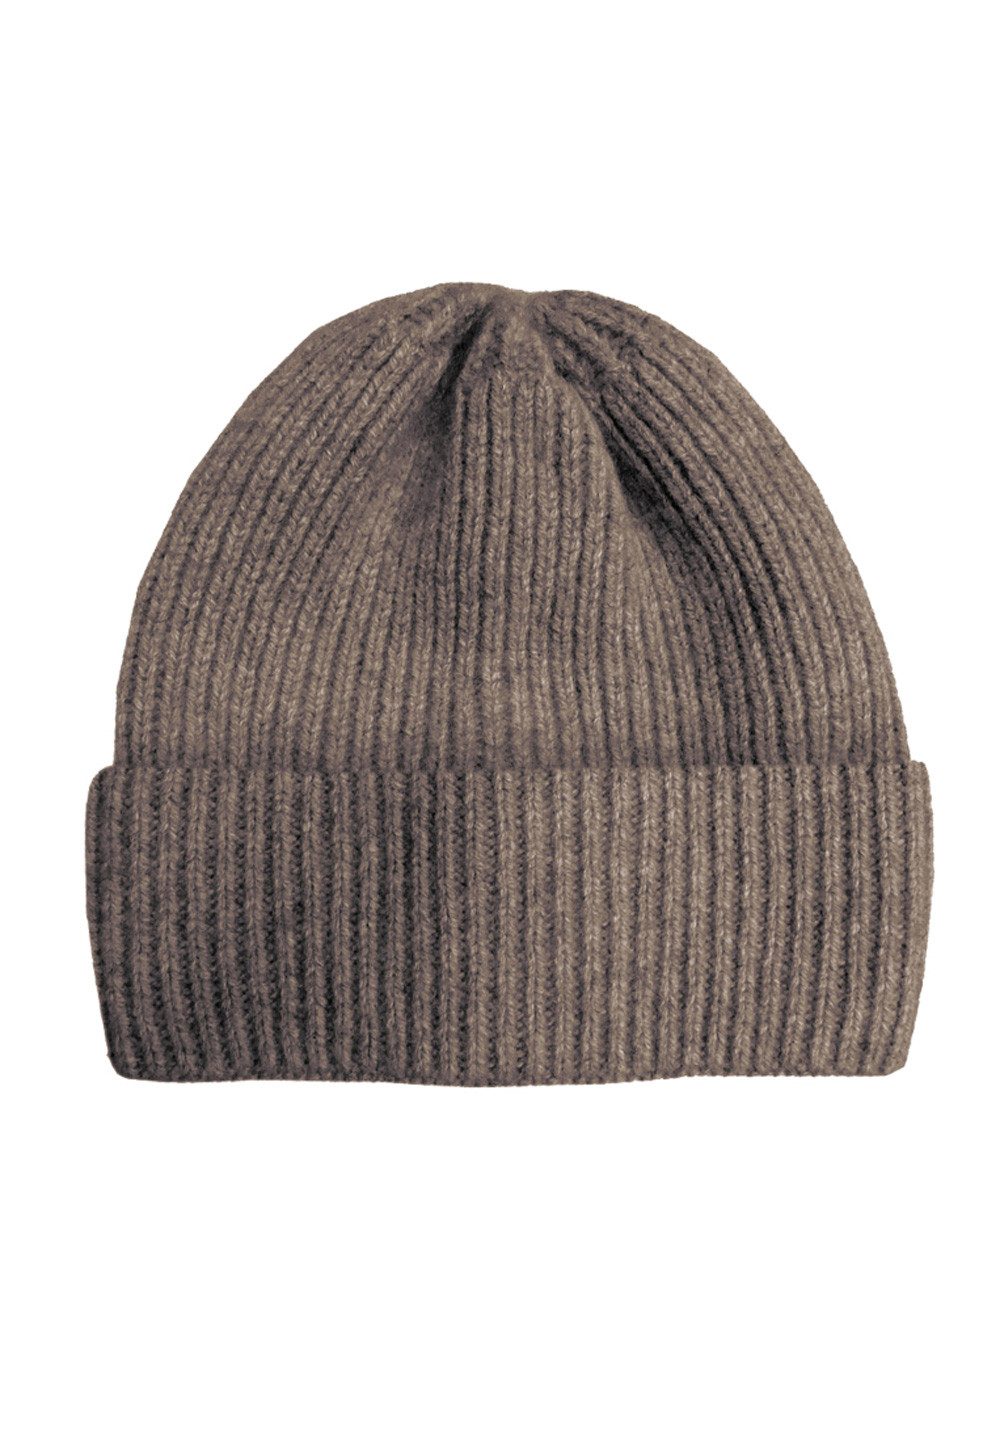 CAPO Strickmütze CAPO-DOUX CAP knitted cap, ribbed, turn up Kaschmi Made in Europe taupe